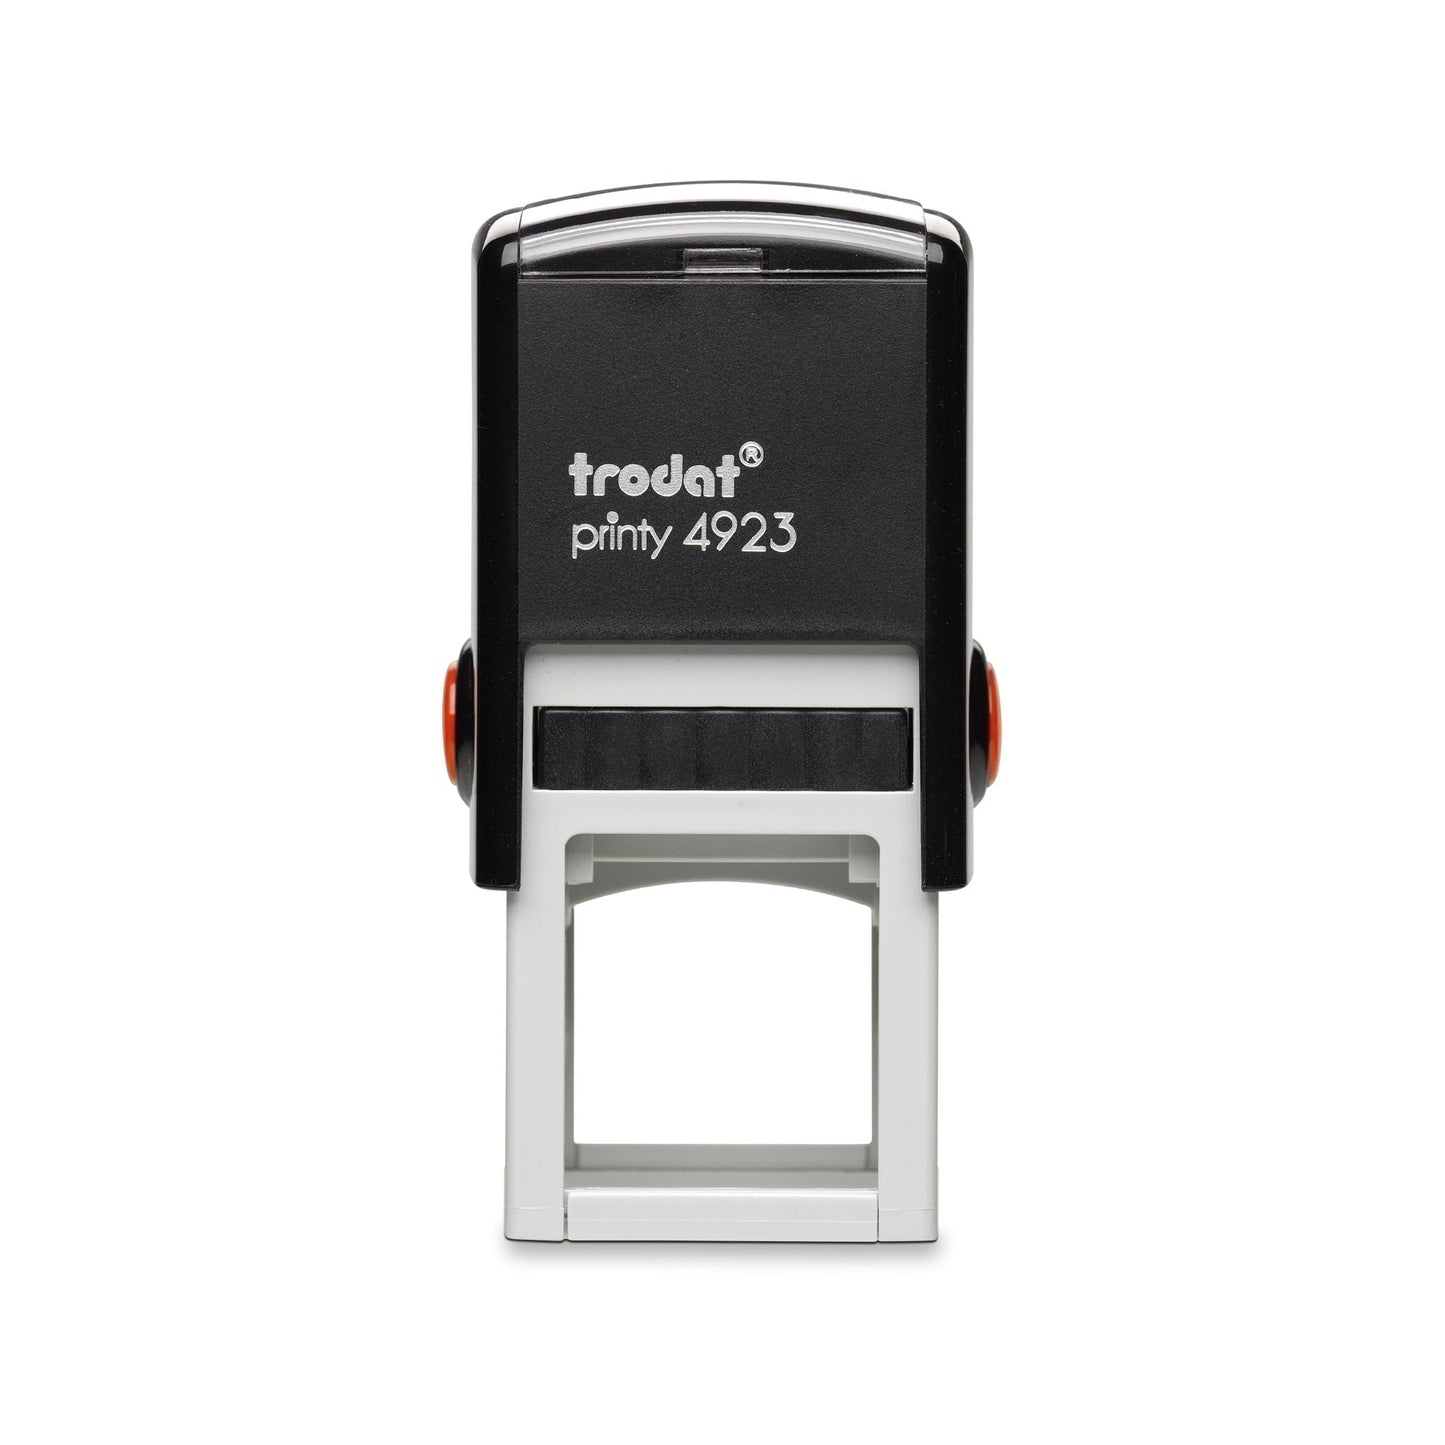 Specialist Serviced To Manufacturers Schedule - Self Inking Rubber Stamp - Trodat 4923 - 28mm x 28mm Impression